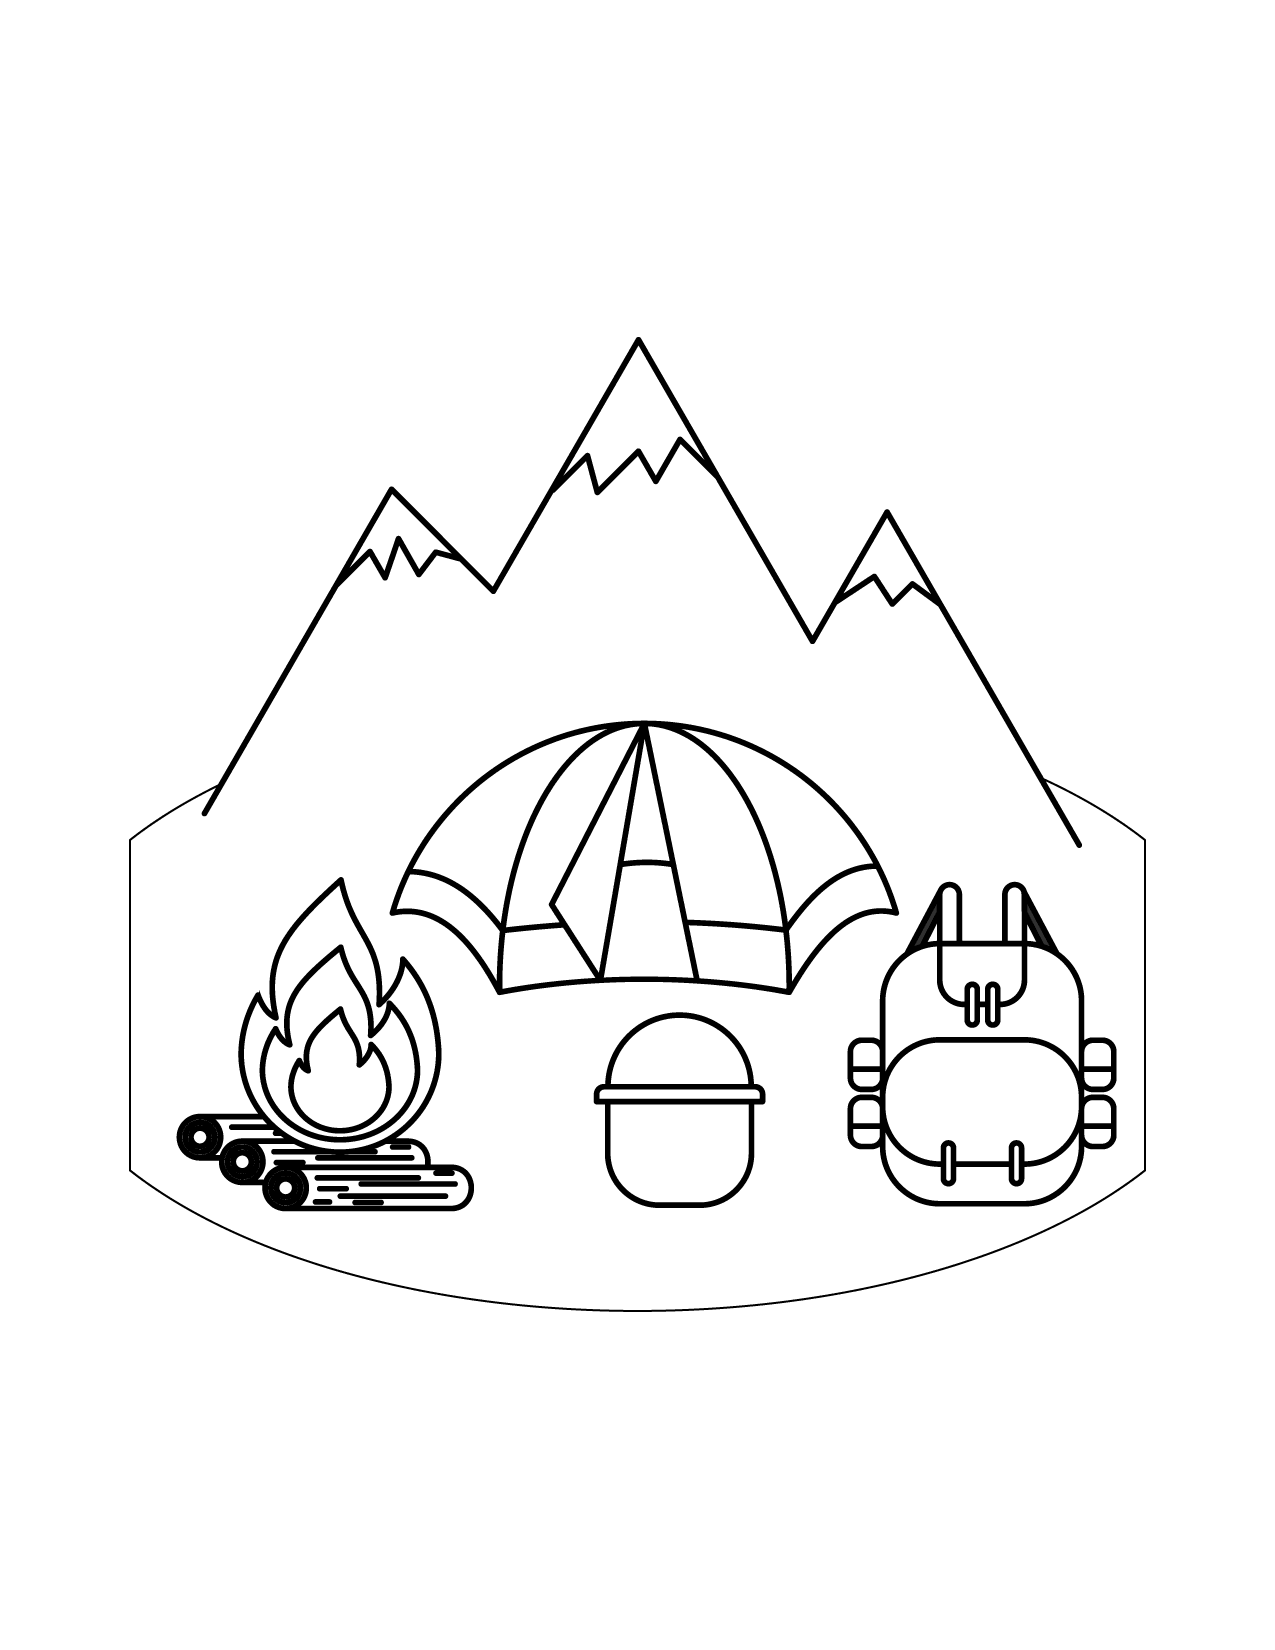 Campground In The Mountains Coloring Page